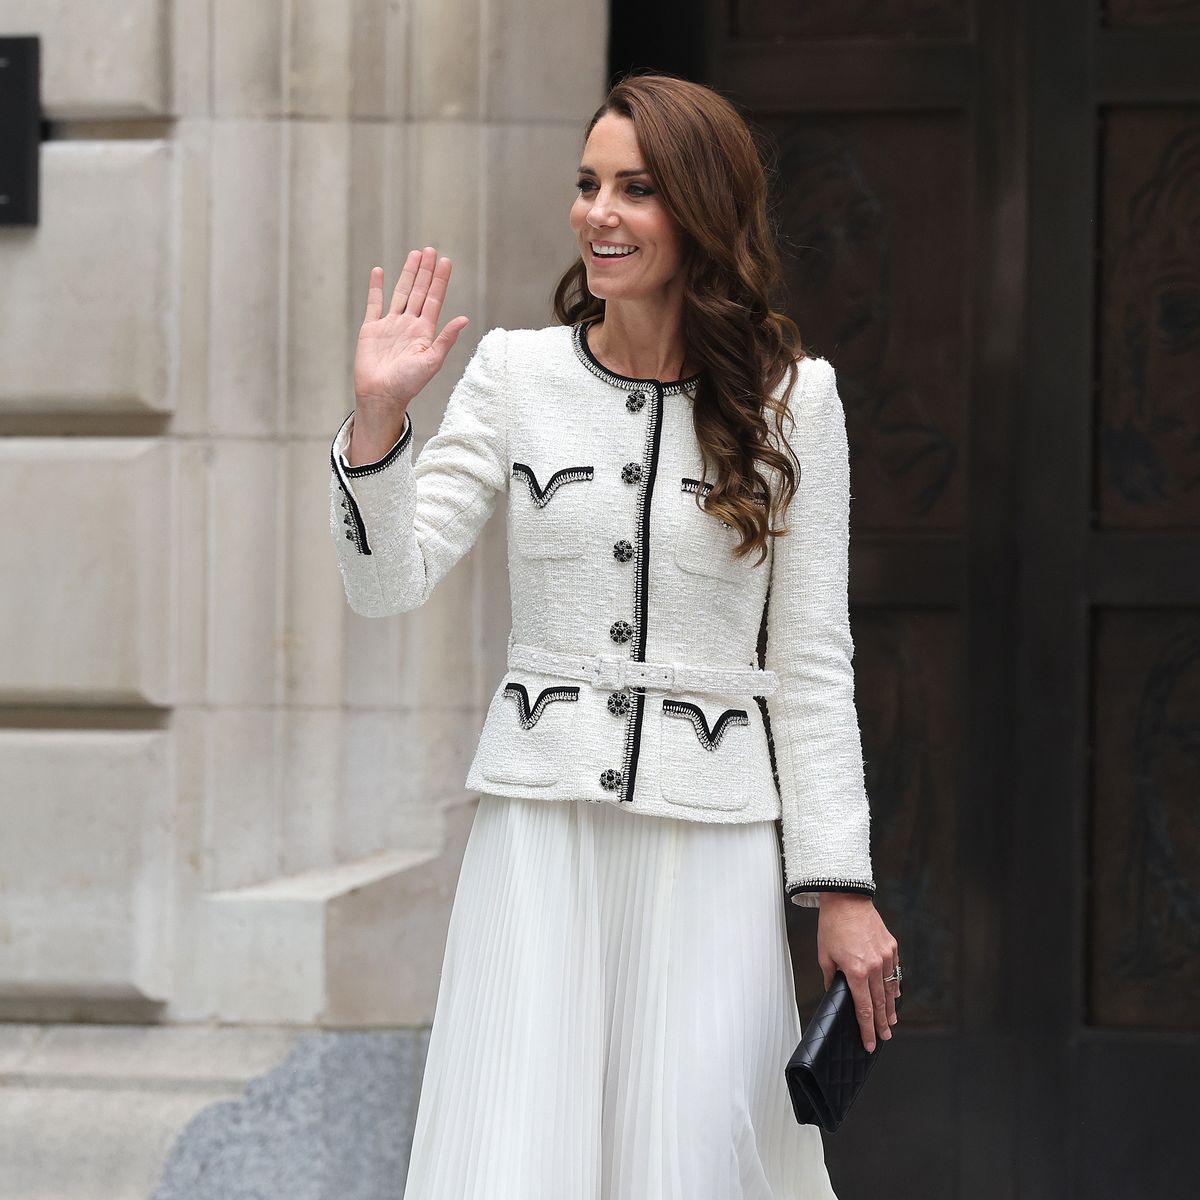 Kate Middleton Steps Out in a White Tweed Blazer and Maxi Skirt